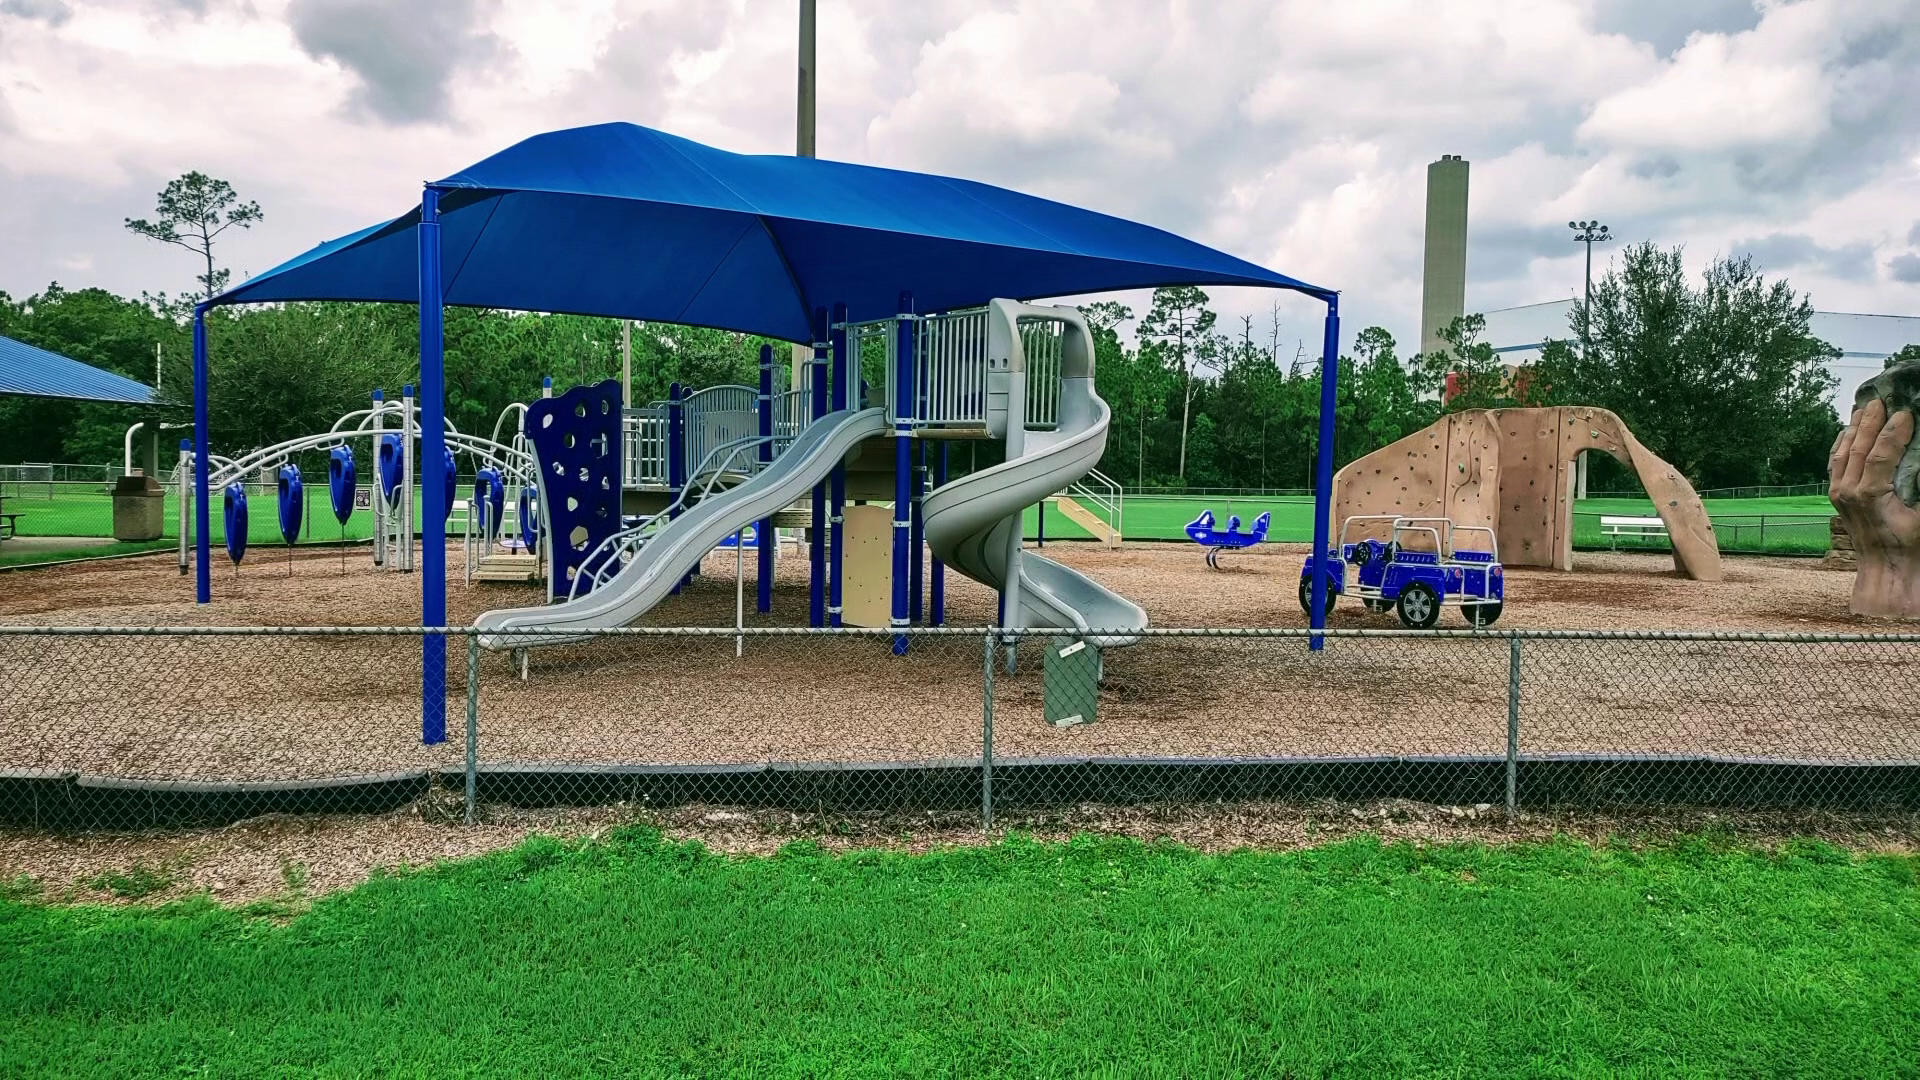 Lee County to spend $ on more shade at public parks